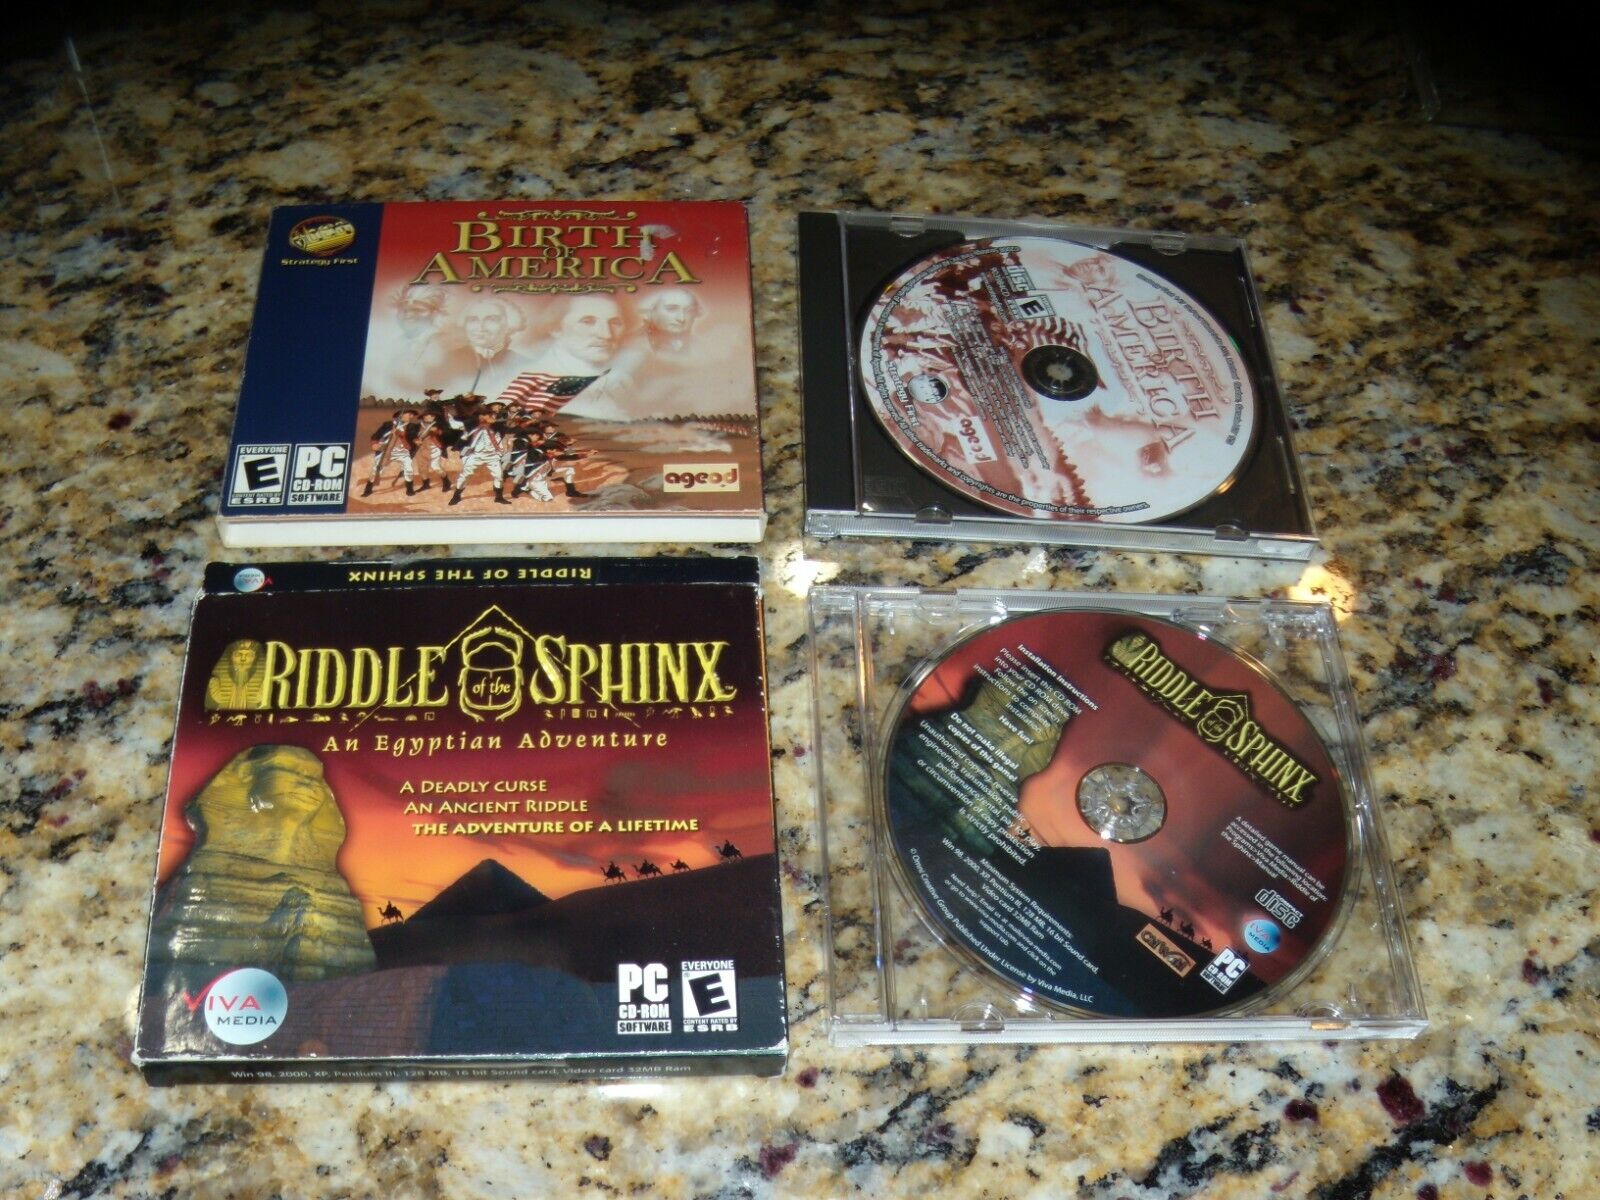 2 Computer games: Birth of America and Riddle of the Sphinx - Near MInt